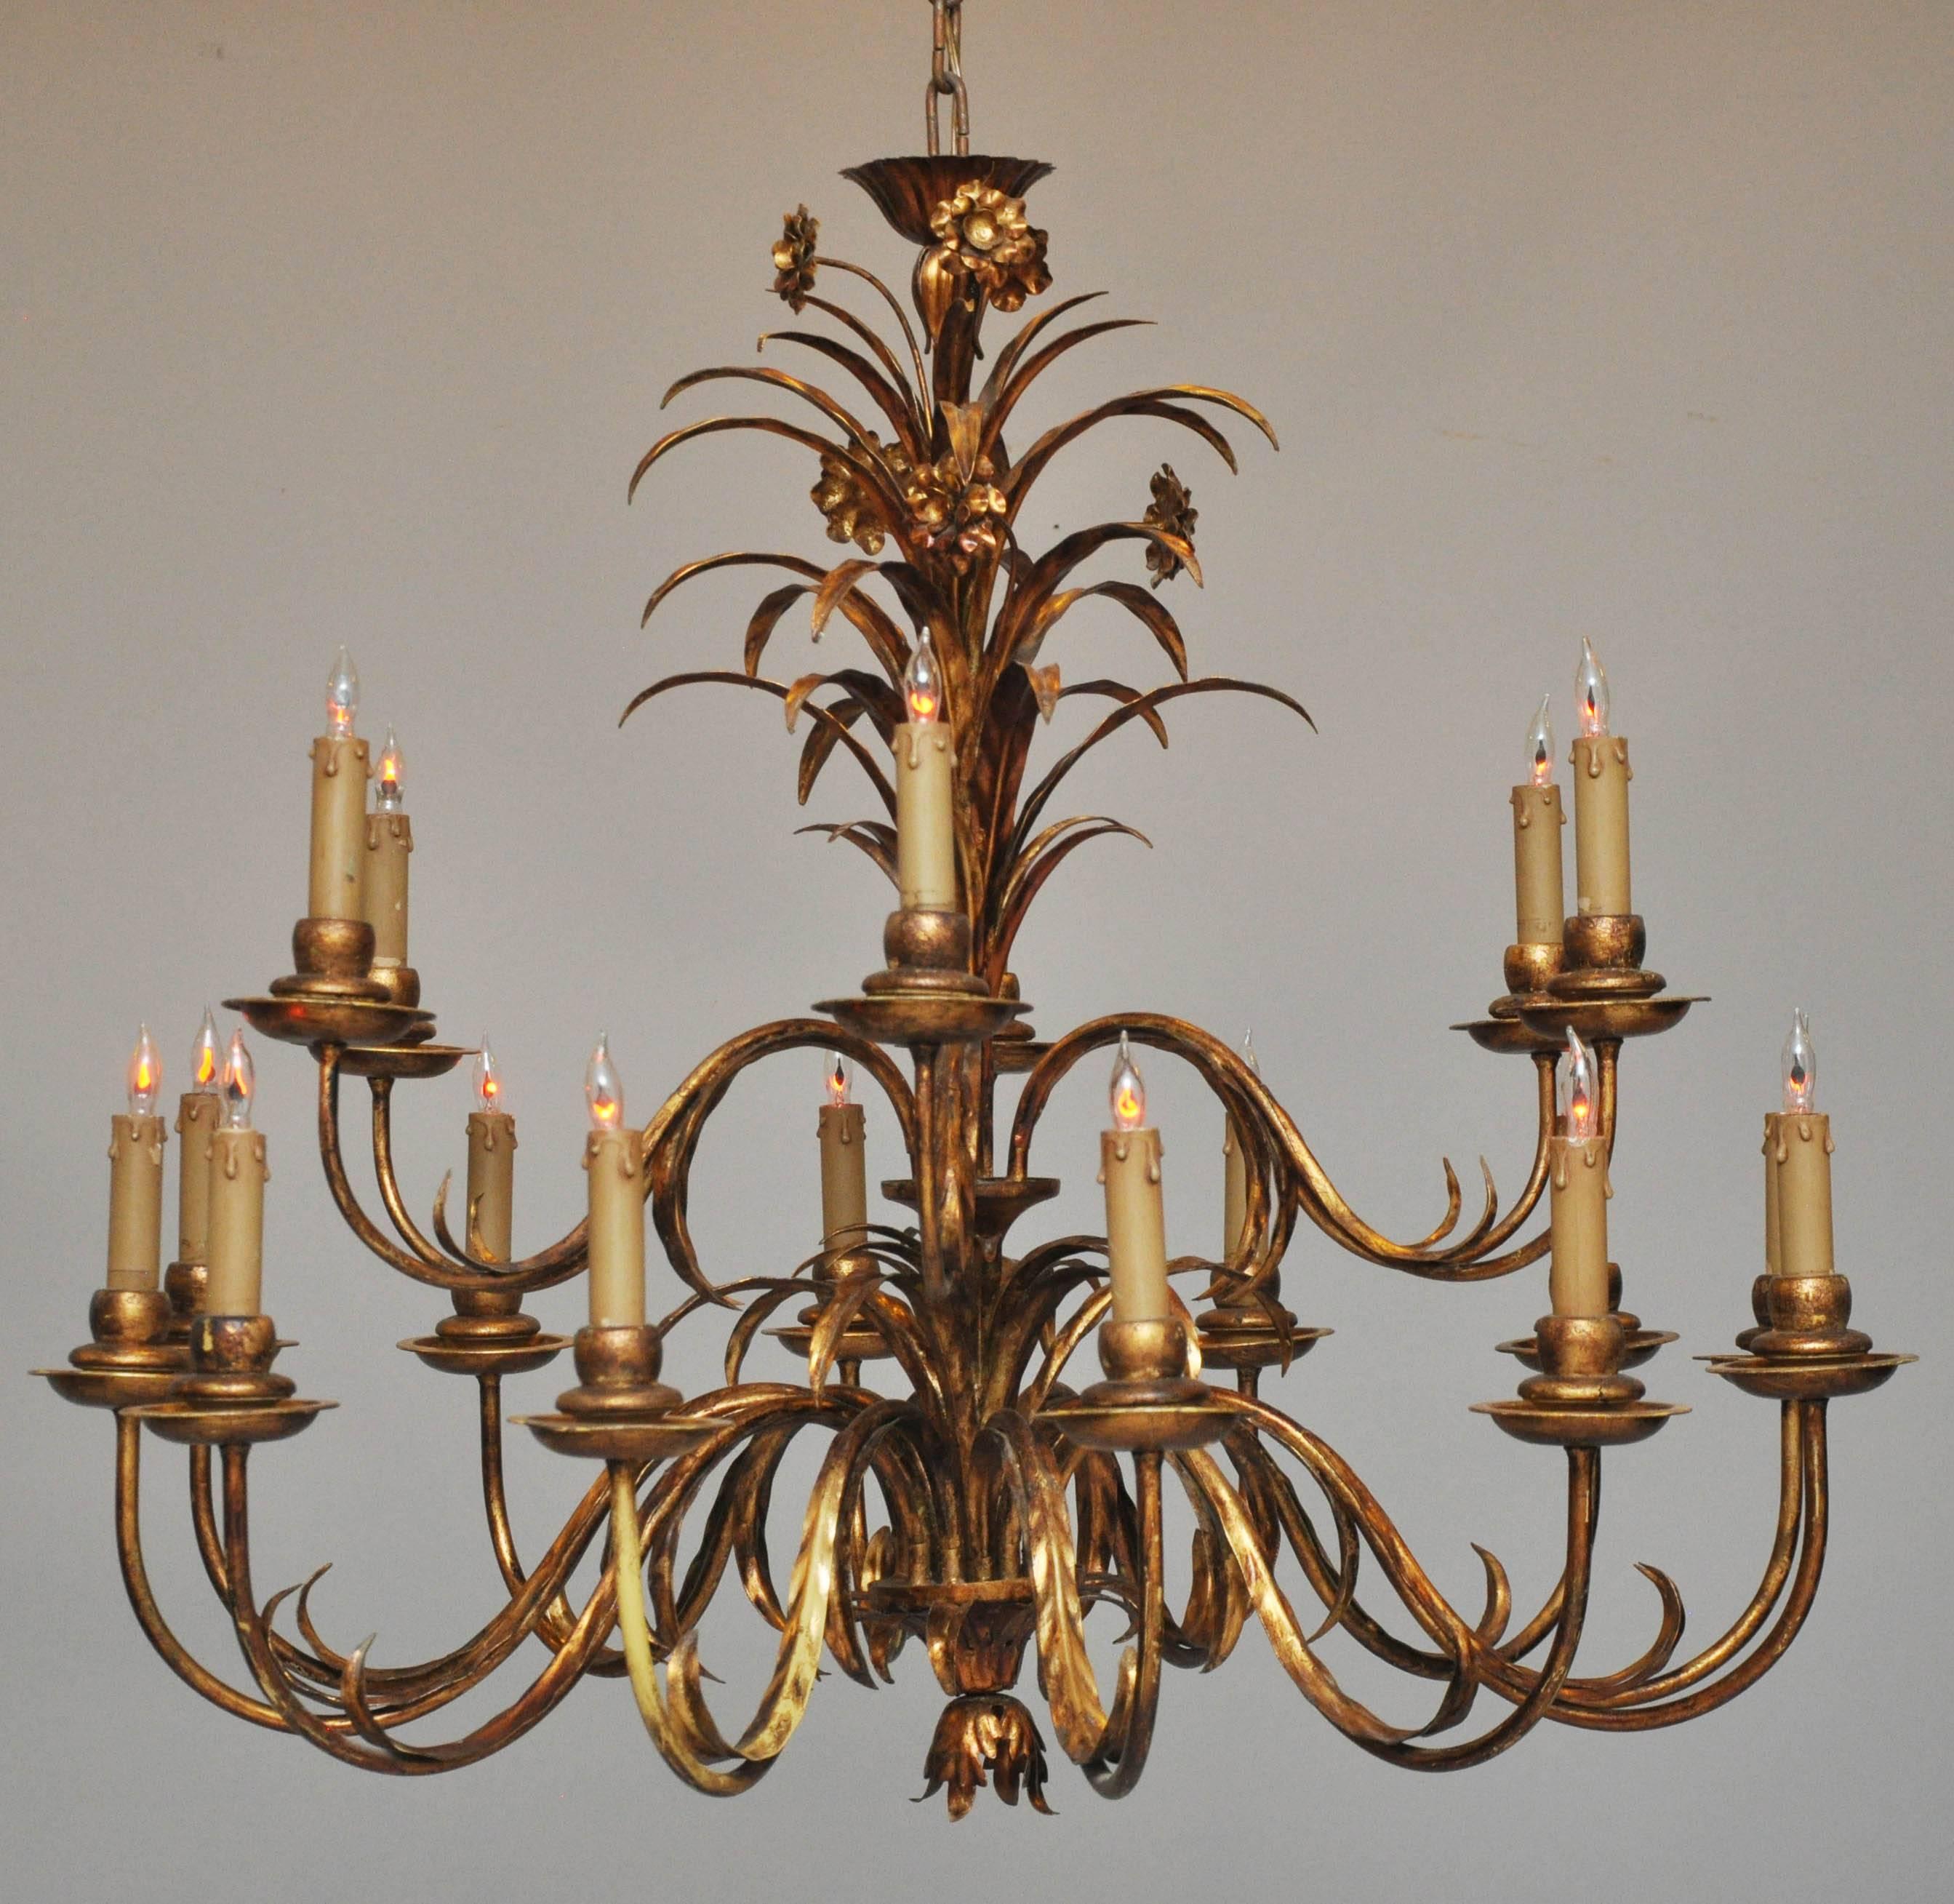 Oversized Italian two-tiered 18 light tole chandelier with aged gilt finish. scrolled arms in the shape of a singular speared leaf ending in a candle light bulb, supported by a central support in the form of spray of long speared leaves and flower